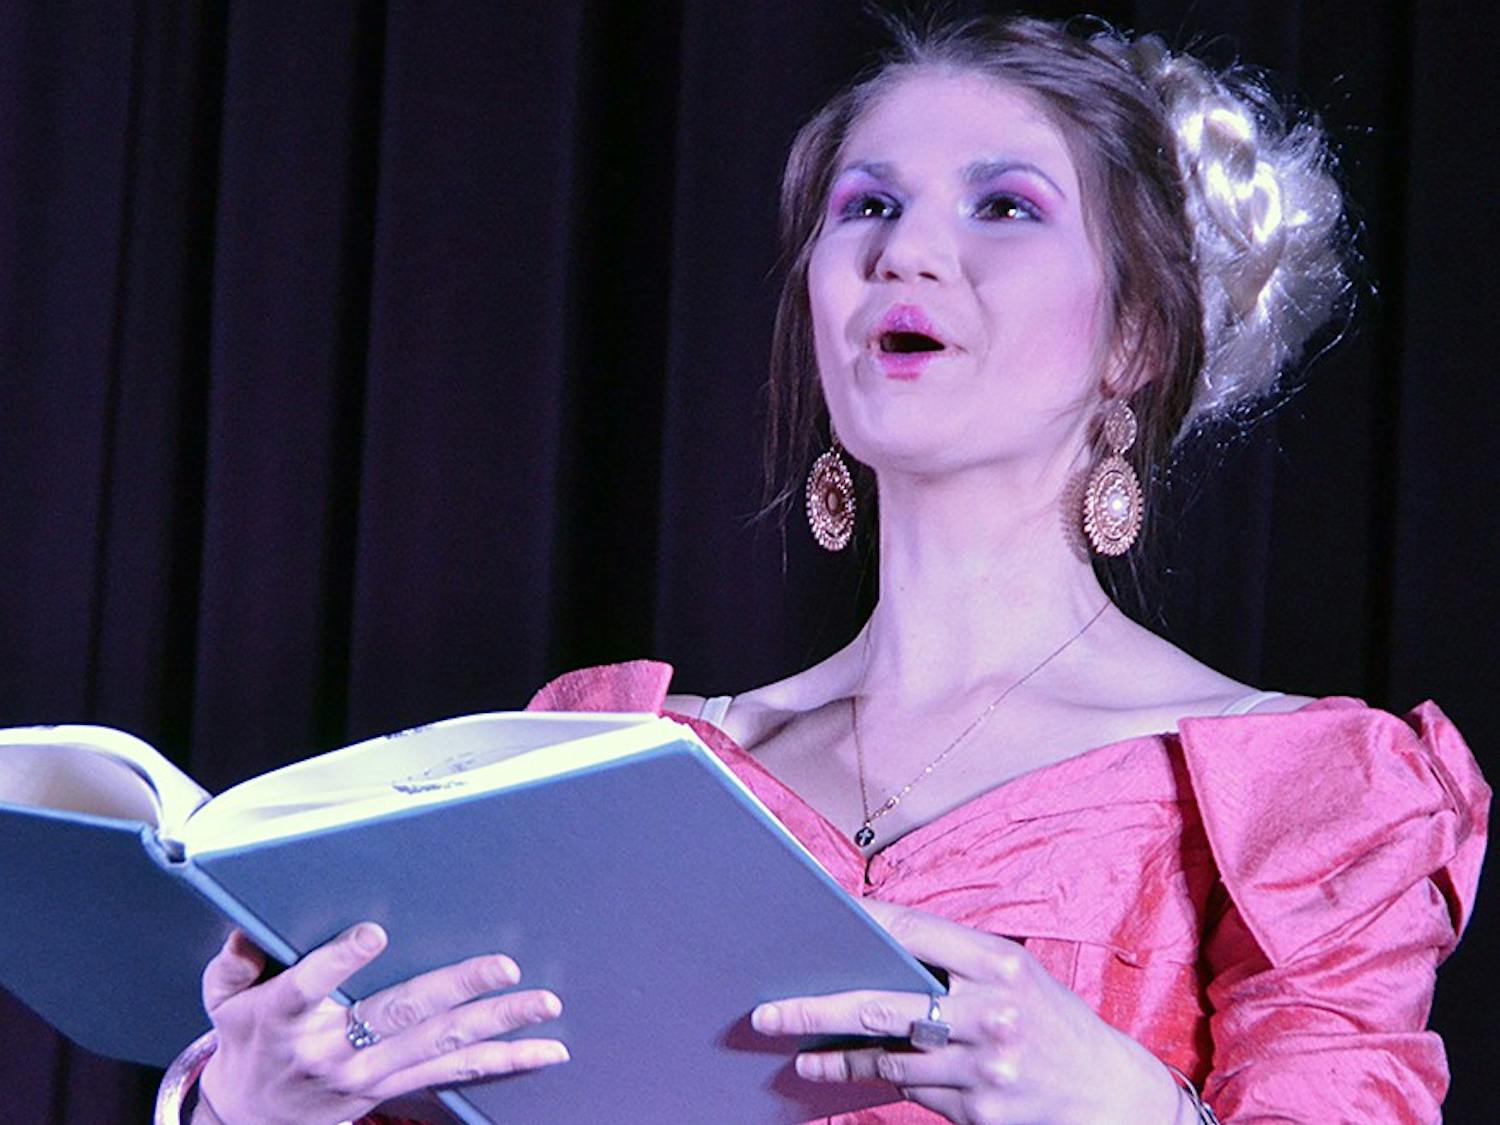 Annie Keller, as Effy, performs on Thursday evening in the upcoming production of the Hunger Games by Pauper's Broadway Melodies.